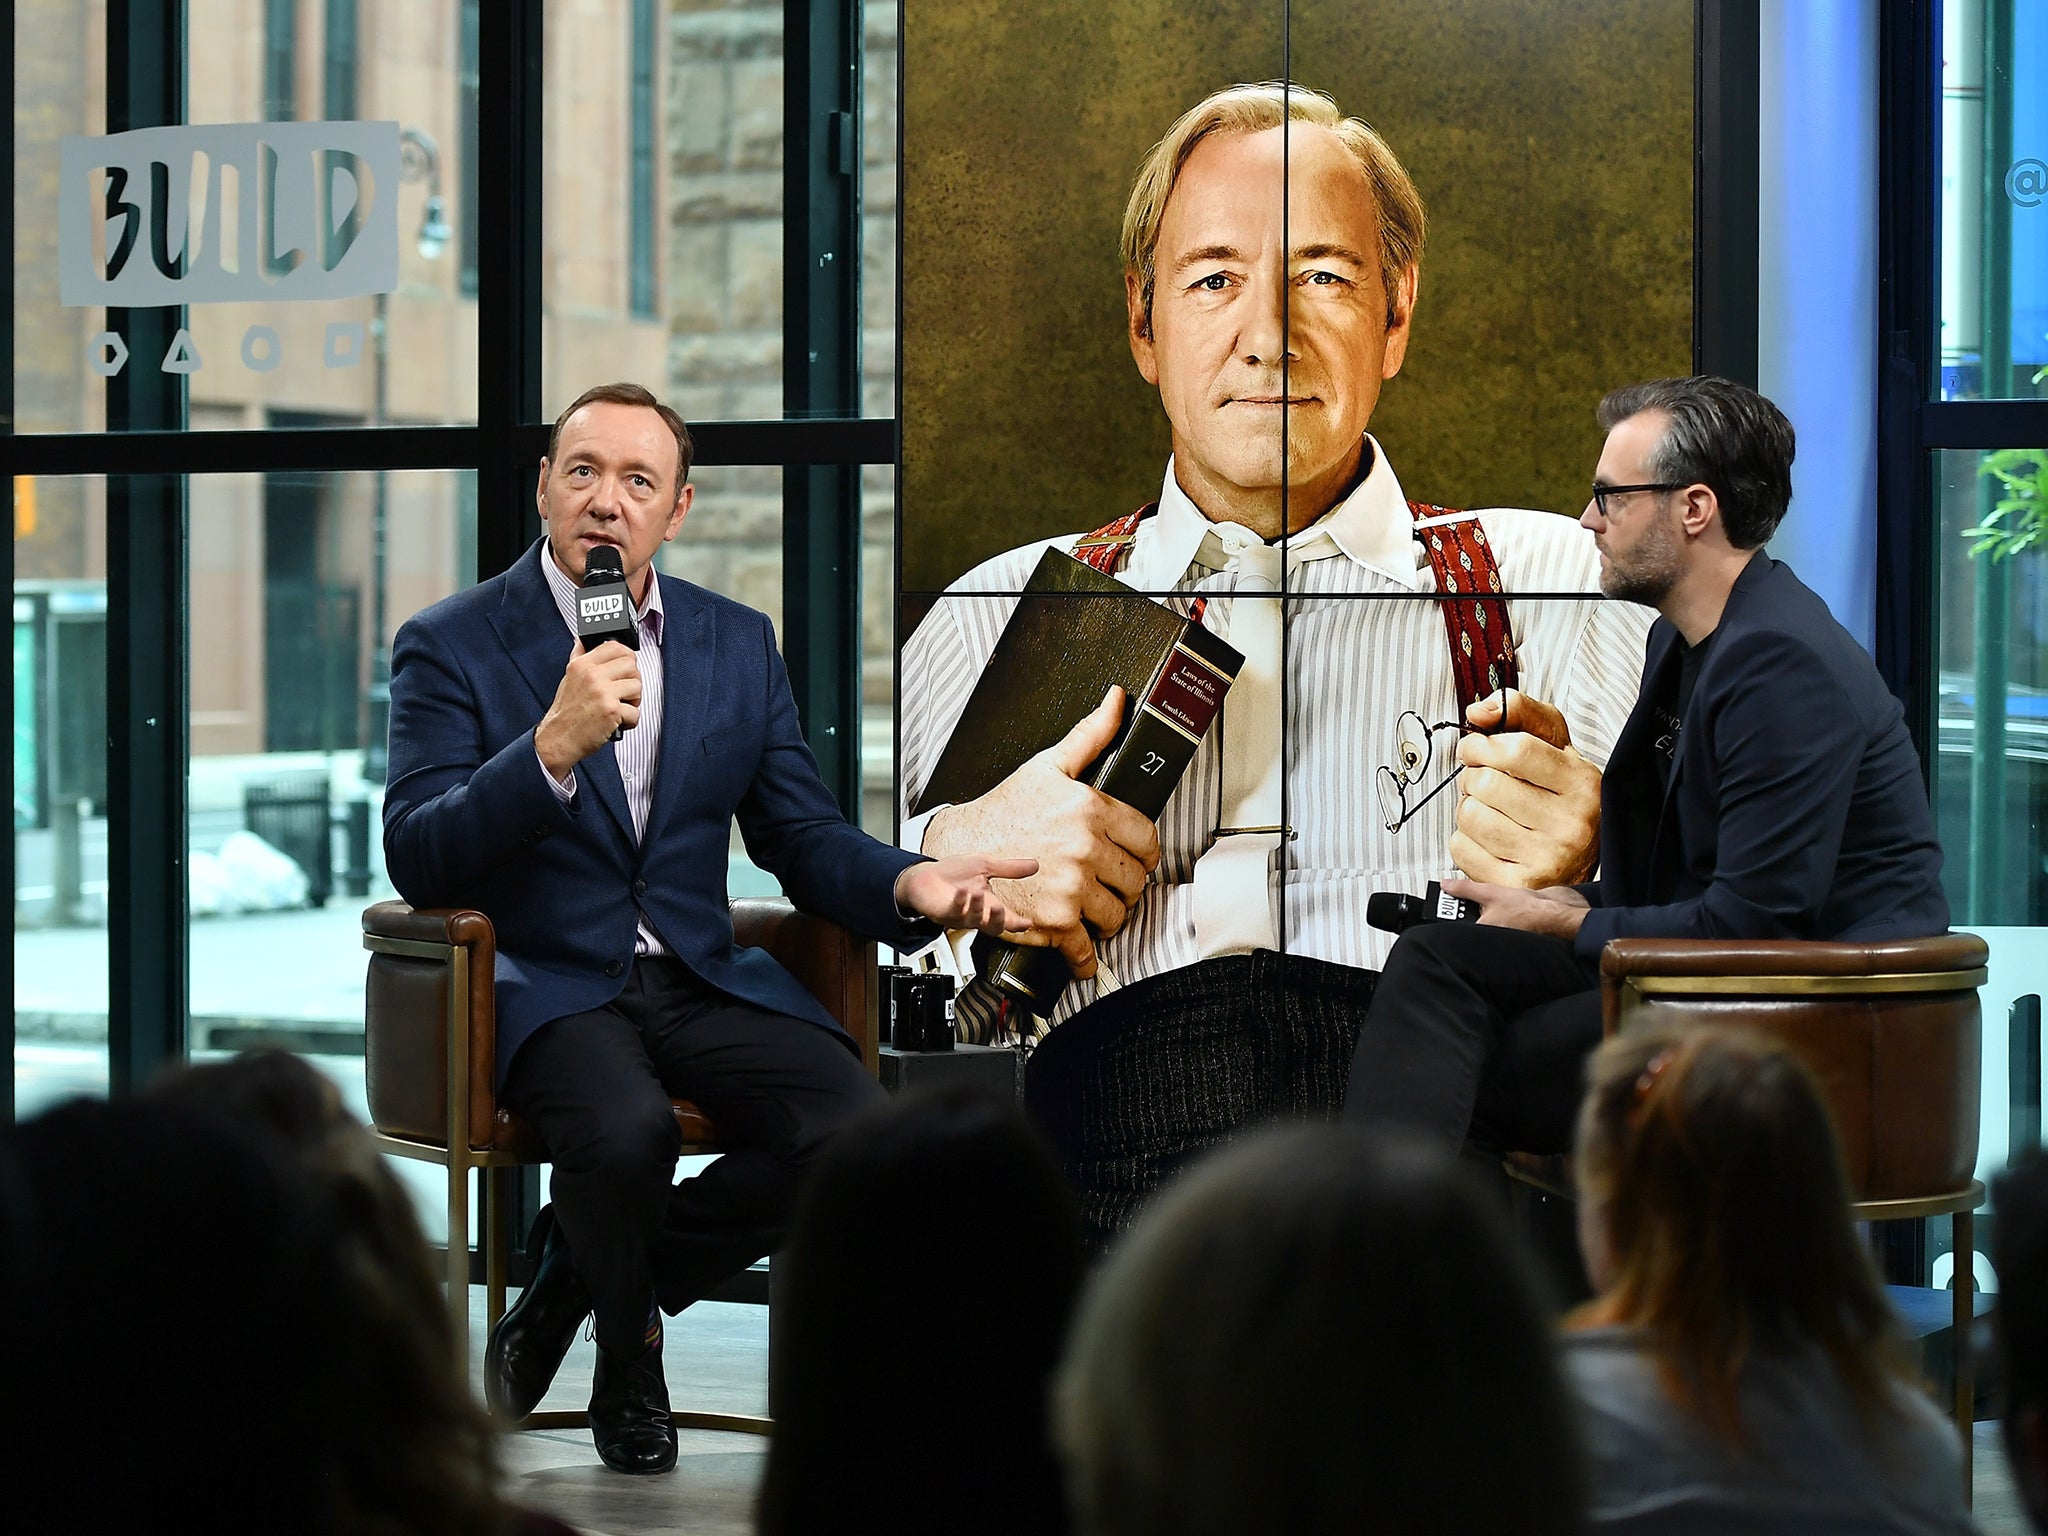 Spacey (left) discussing his new play ‘Clarence Darrow’ with Ricky Camilleri (right) in New York City